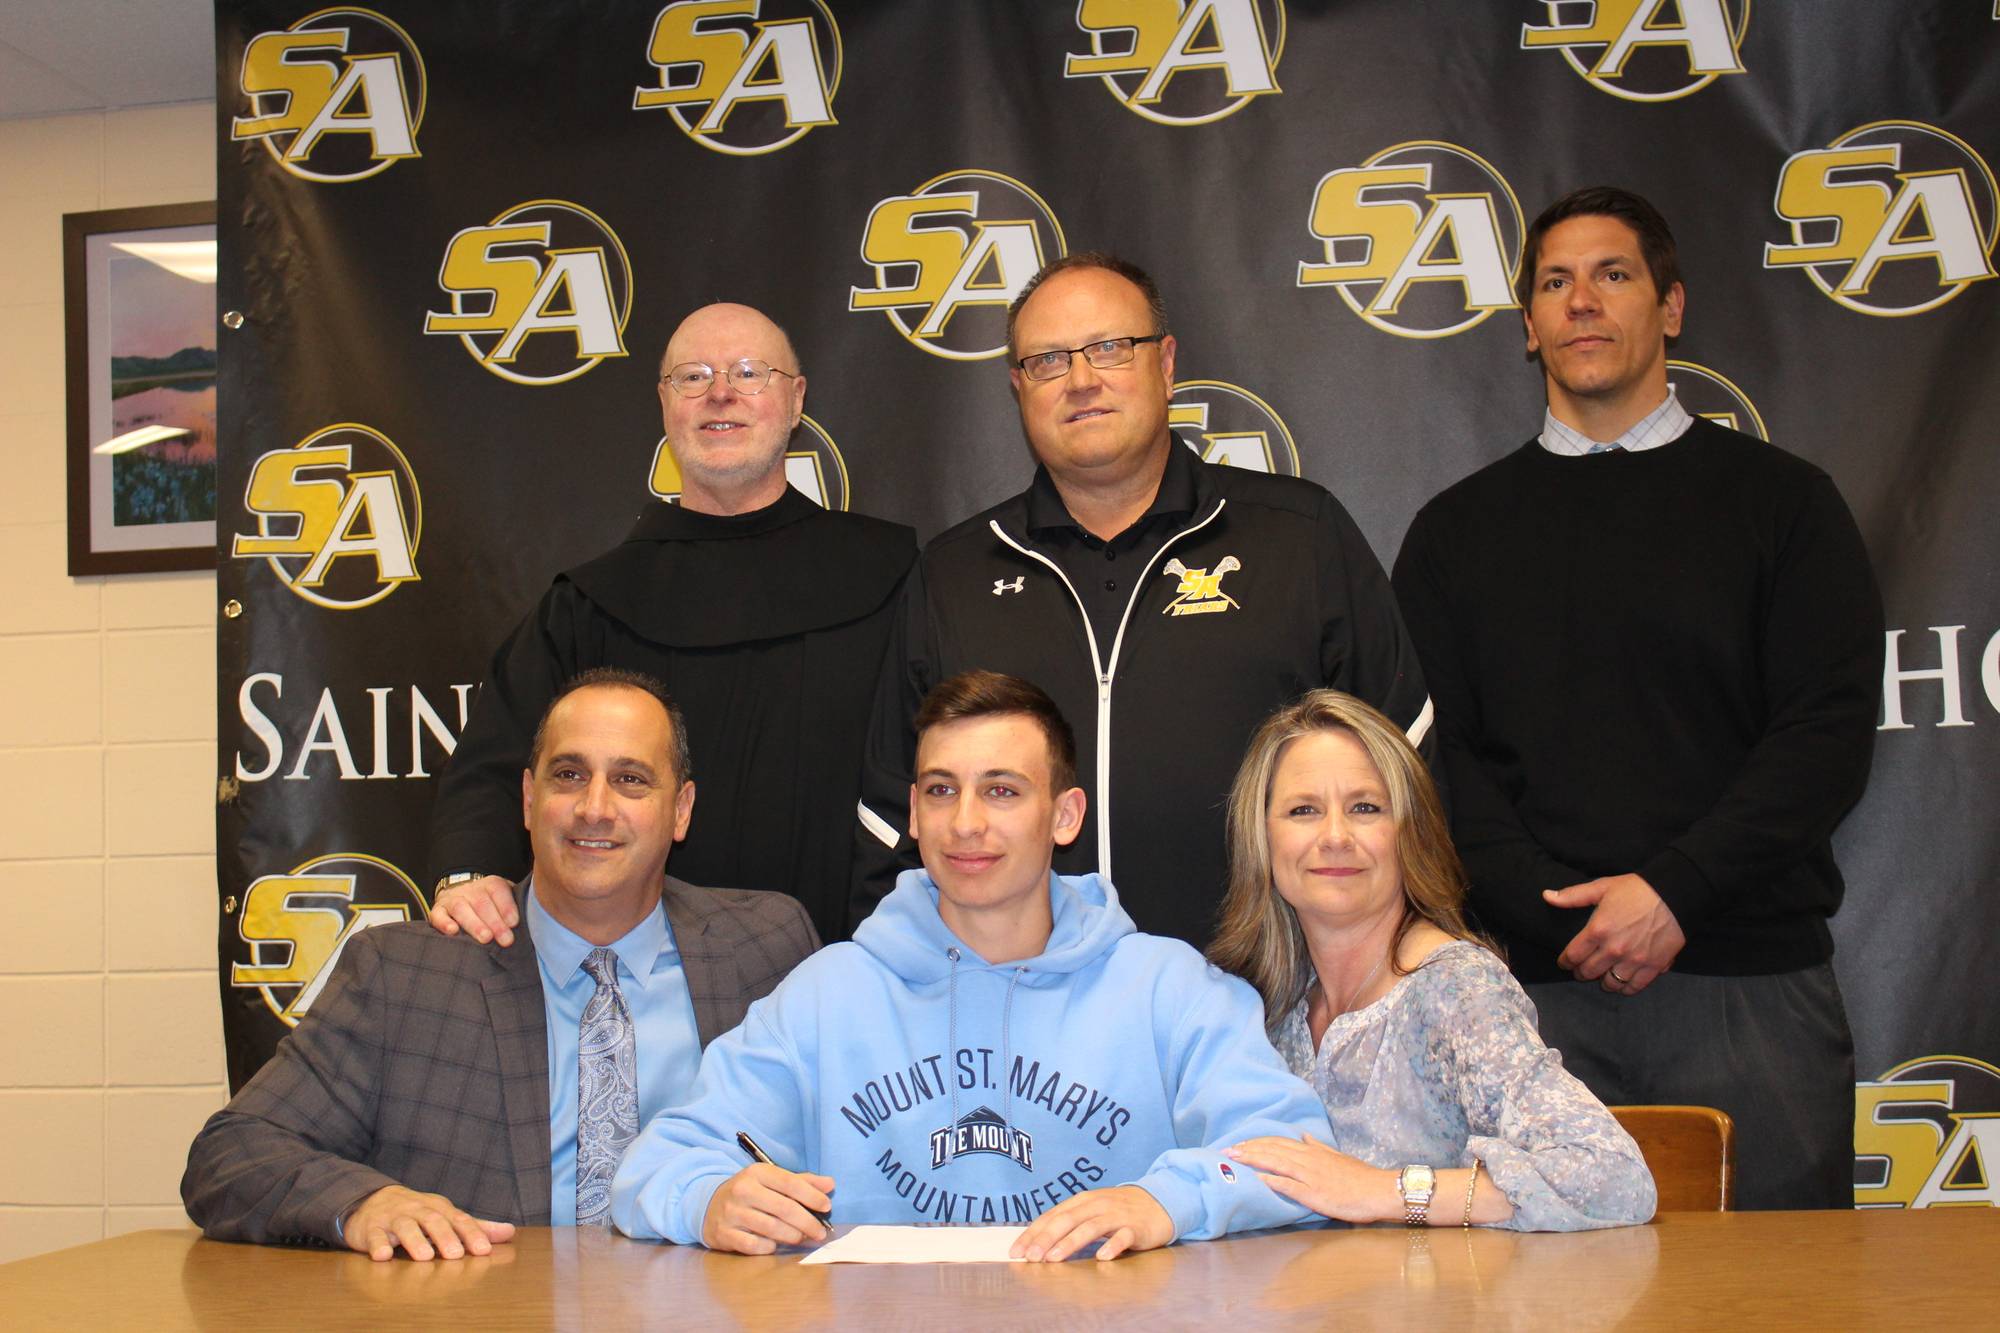 Congratulations to Philip Polo on committing to Mt. St. Mary University to play Lacrosse